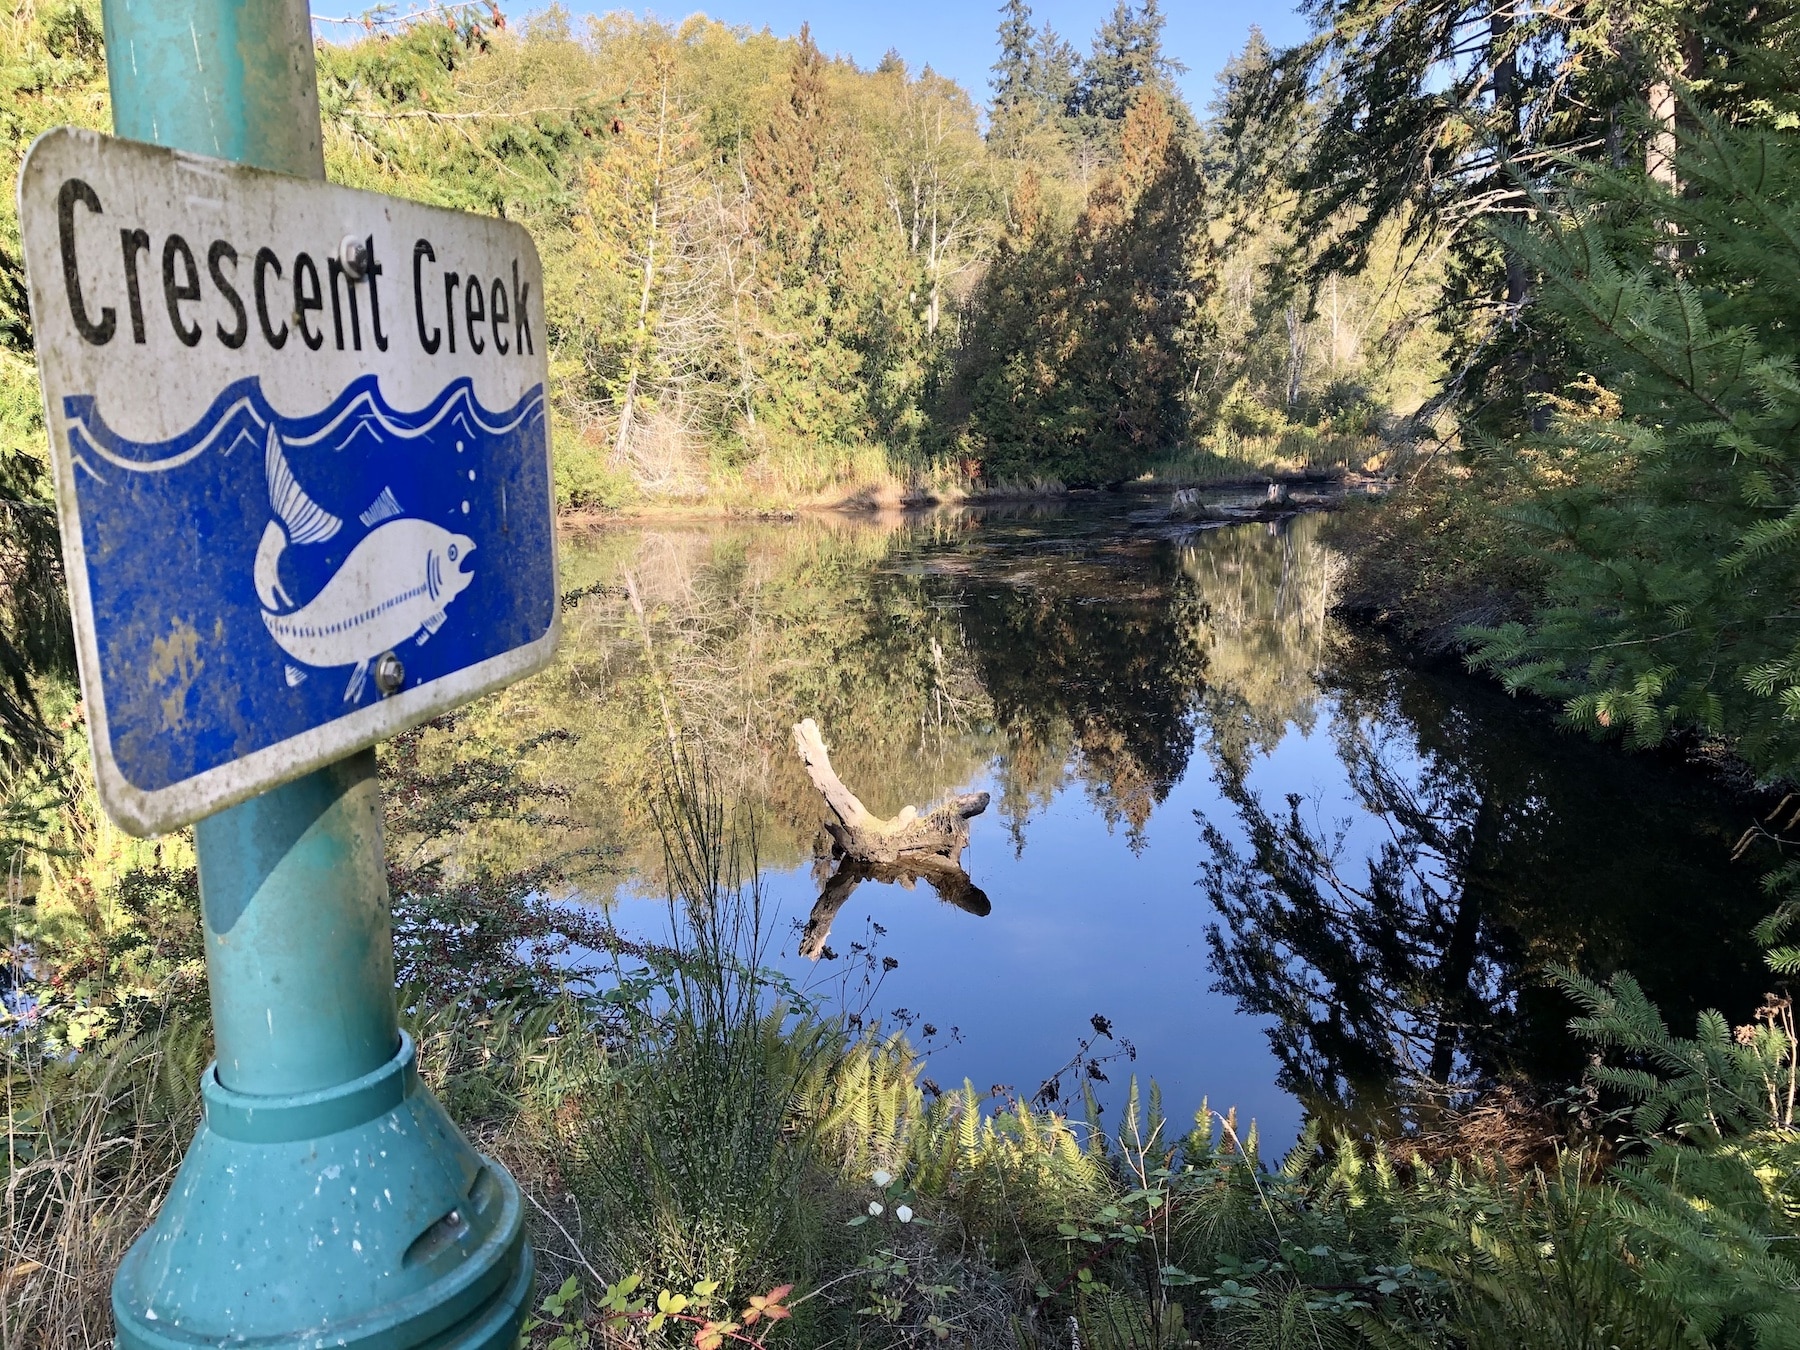 Mouth of Crescent Creek in Gig Harbor